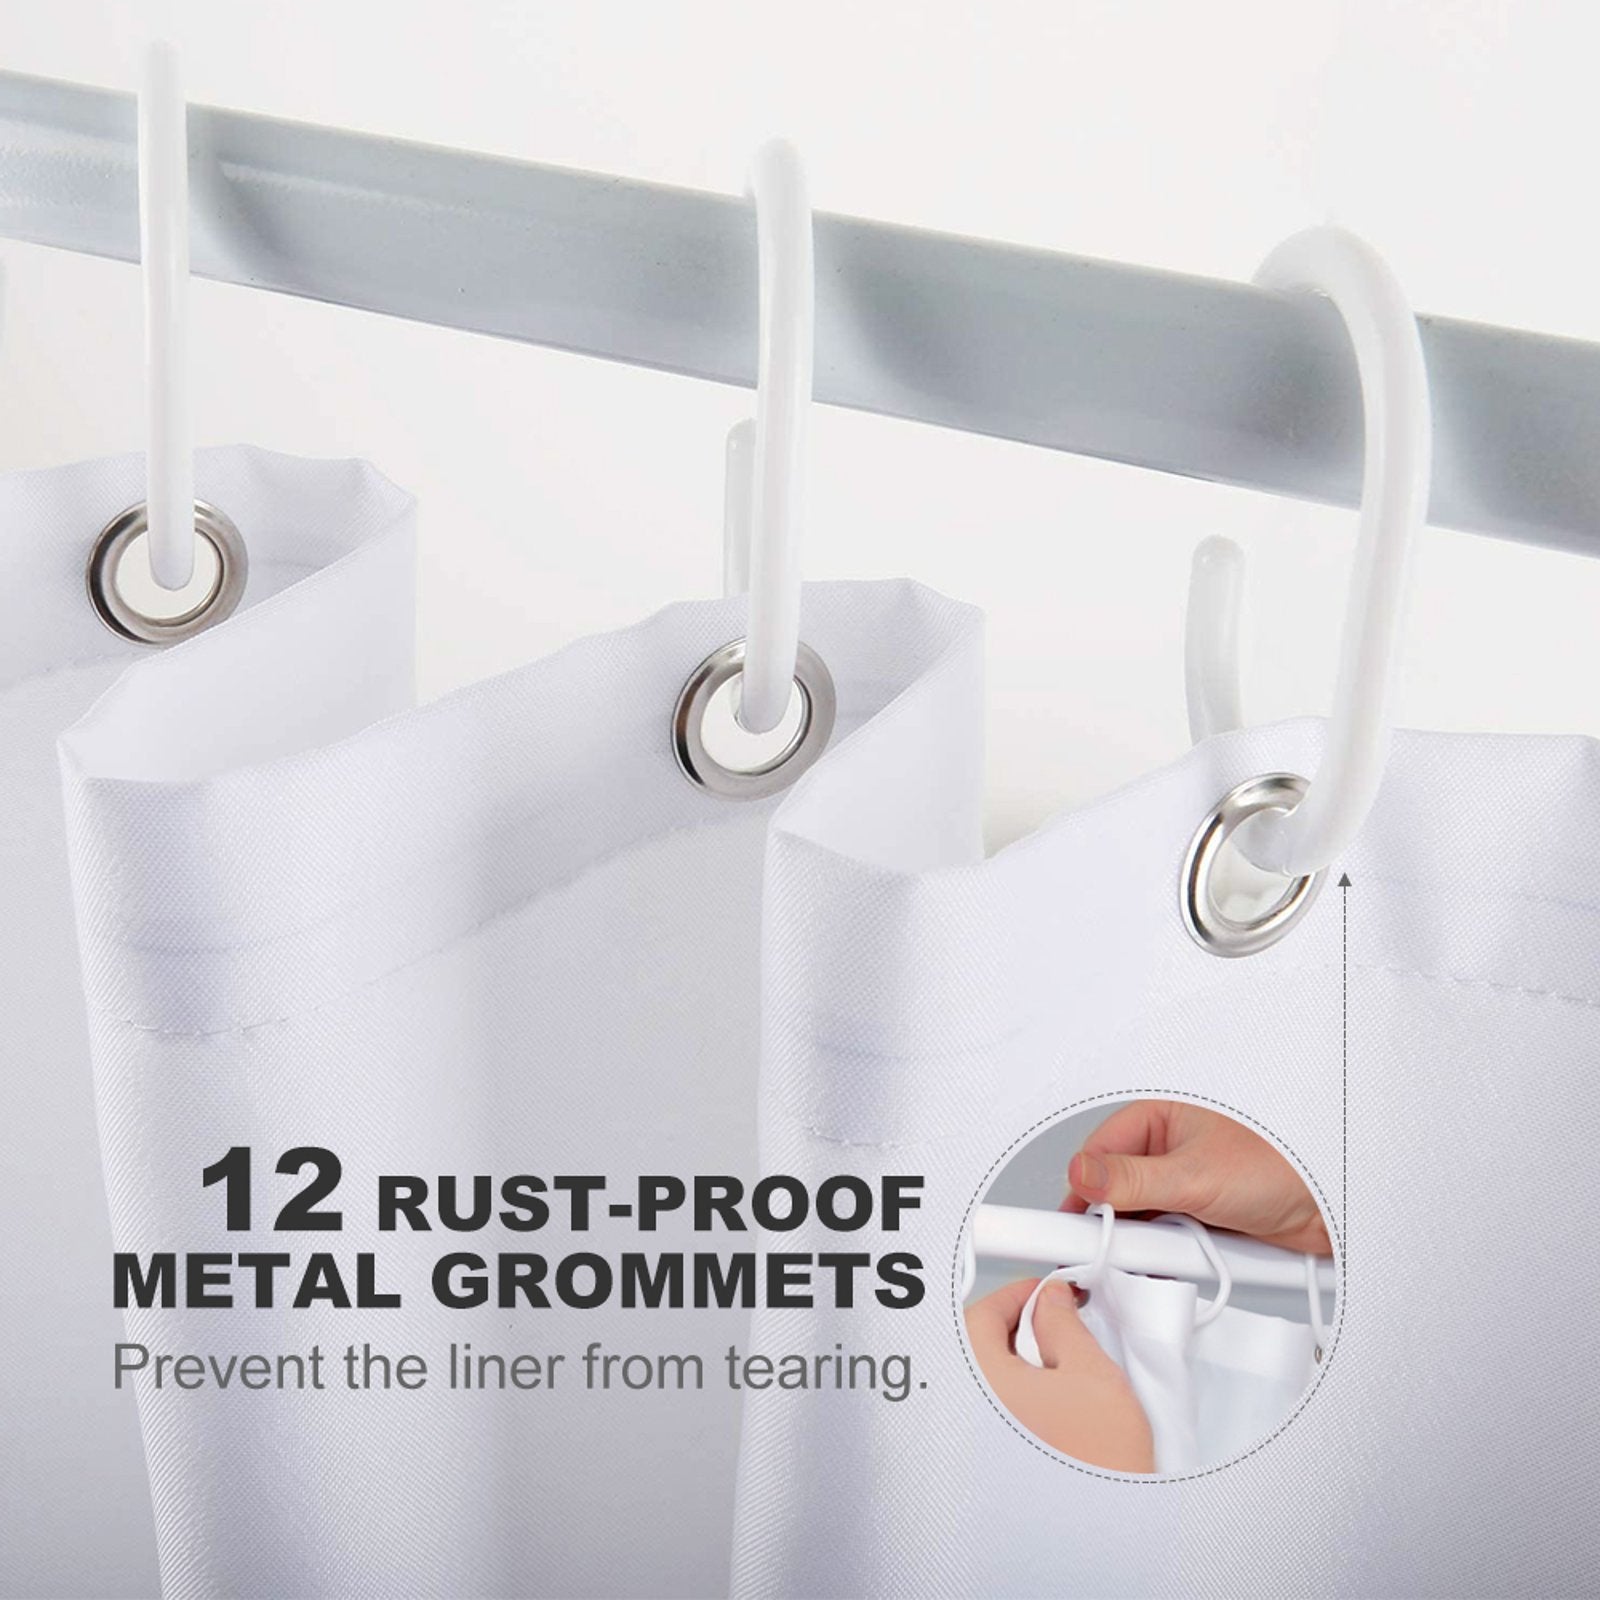 Close-up of a shower curtain with white rings hanging on a rod, featuring 12 rust-proof metal grommets. An inset image shows a person handling the grommet to prevent liner tearing. Text reads: "Funny Letters Black and White Marble Get Naked Shower Curtain-Cottoncat – 12 Rust-Proof Metal Grommets by Cotton Cat.